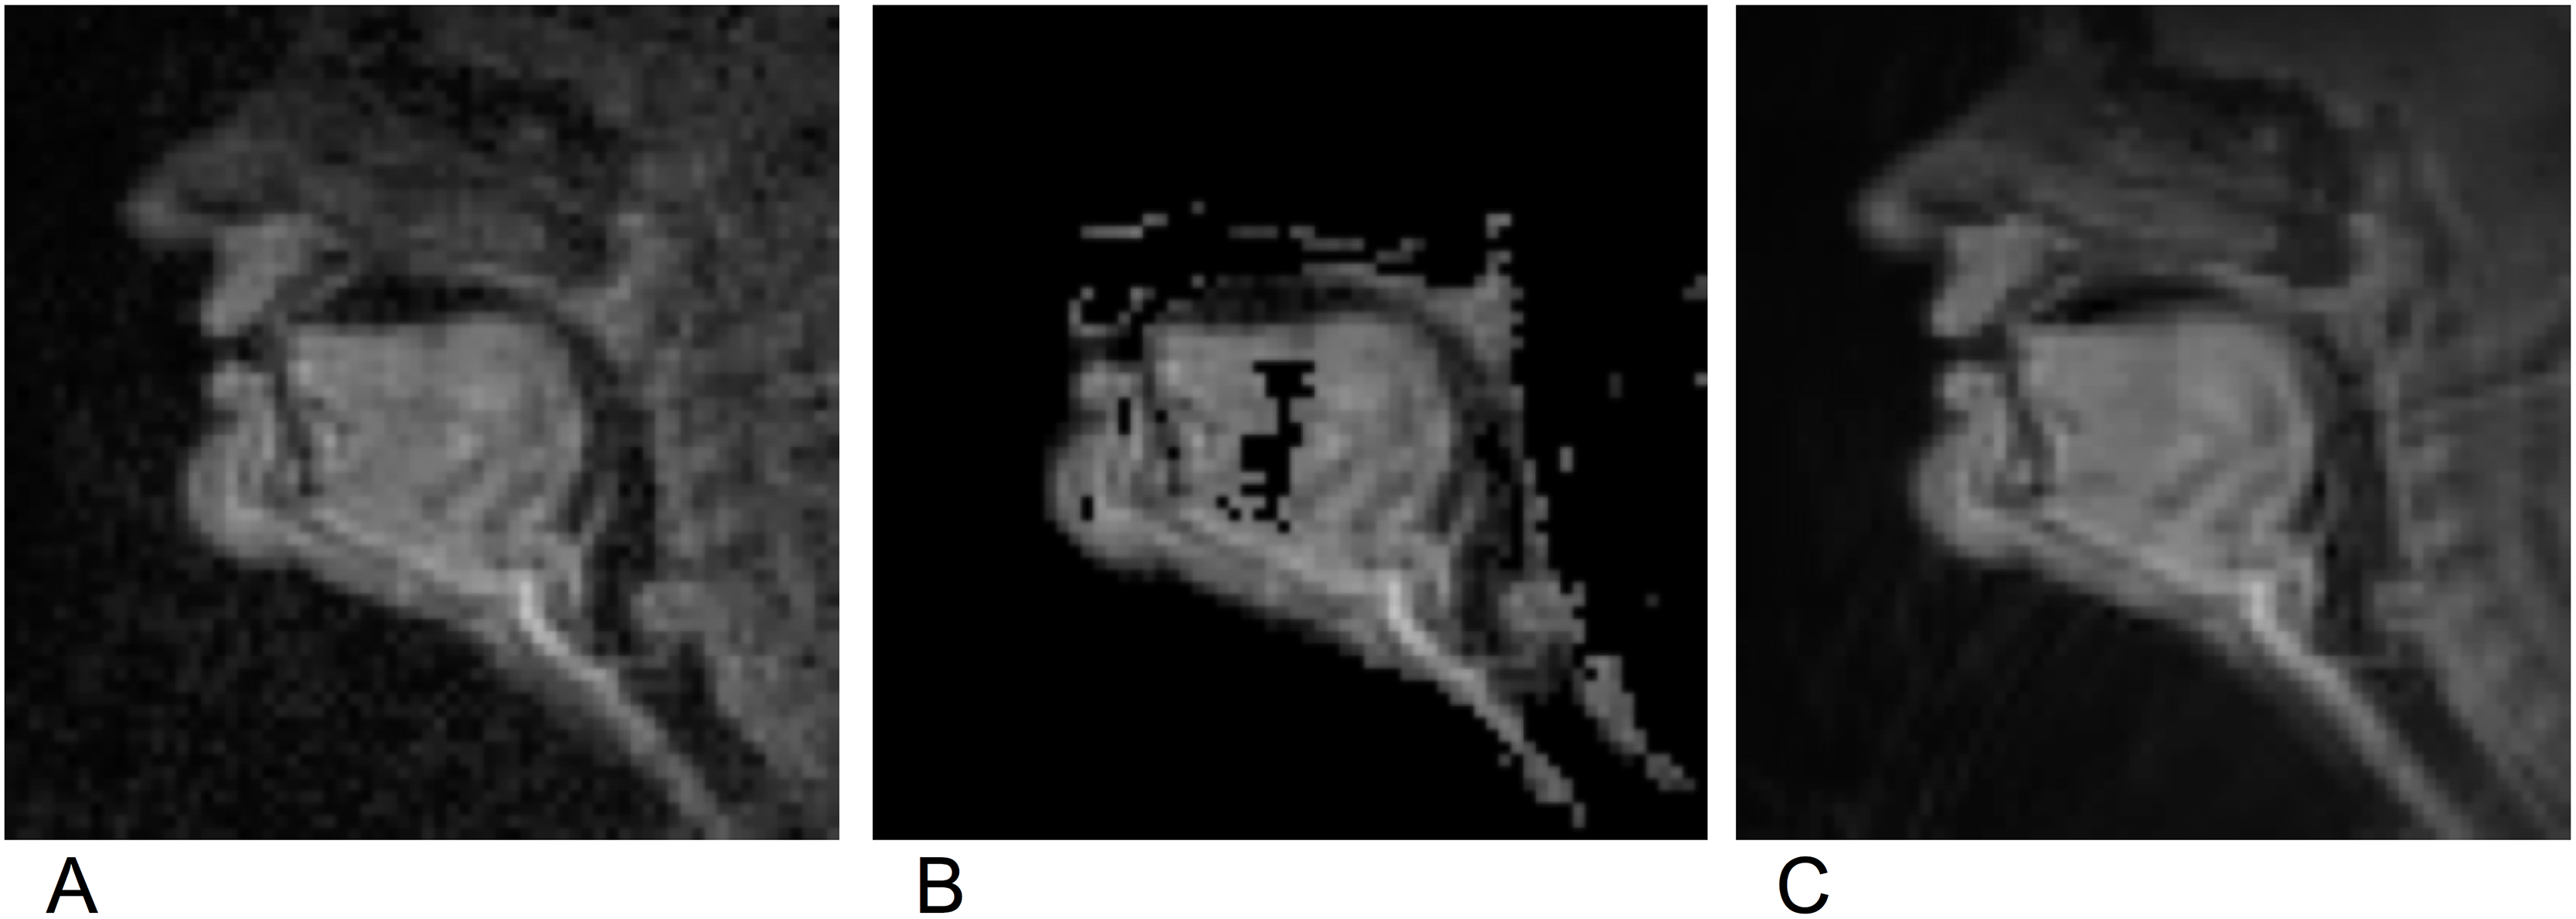 MRI Scan - Side Profile of face